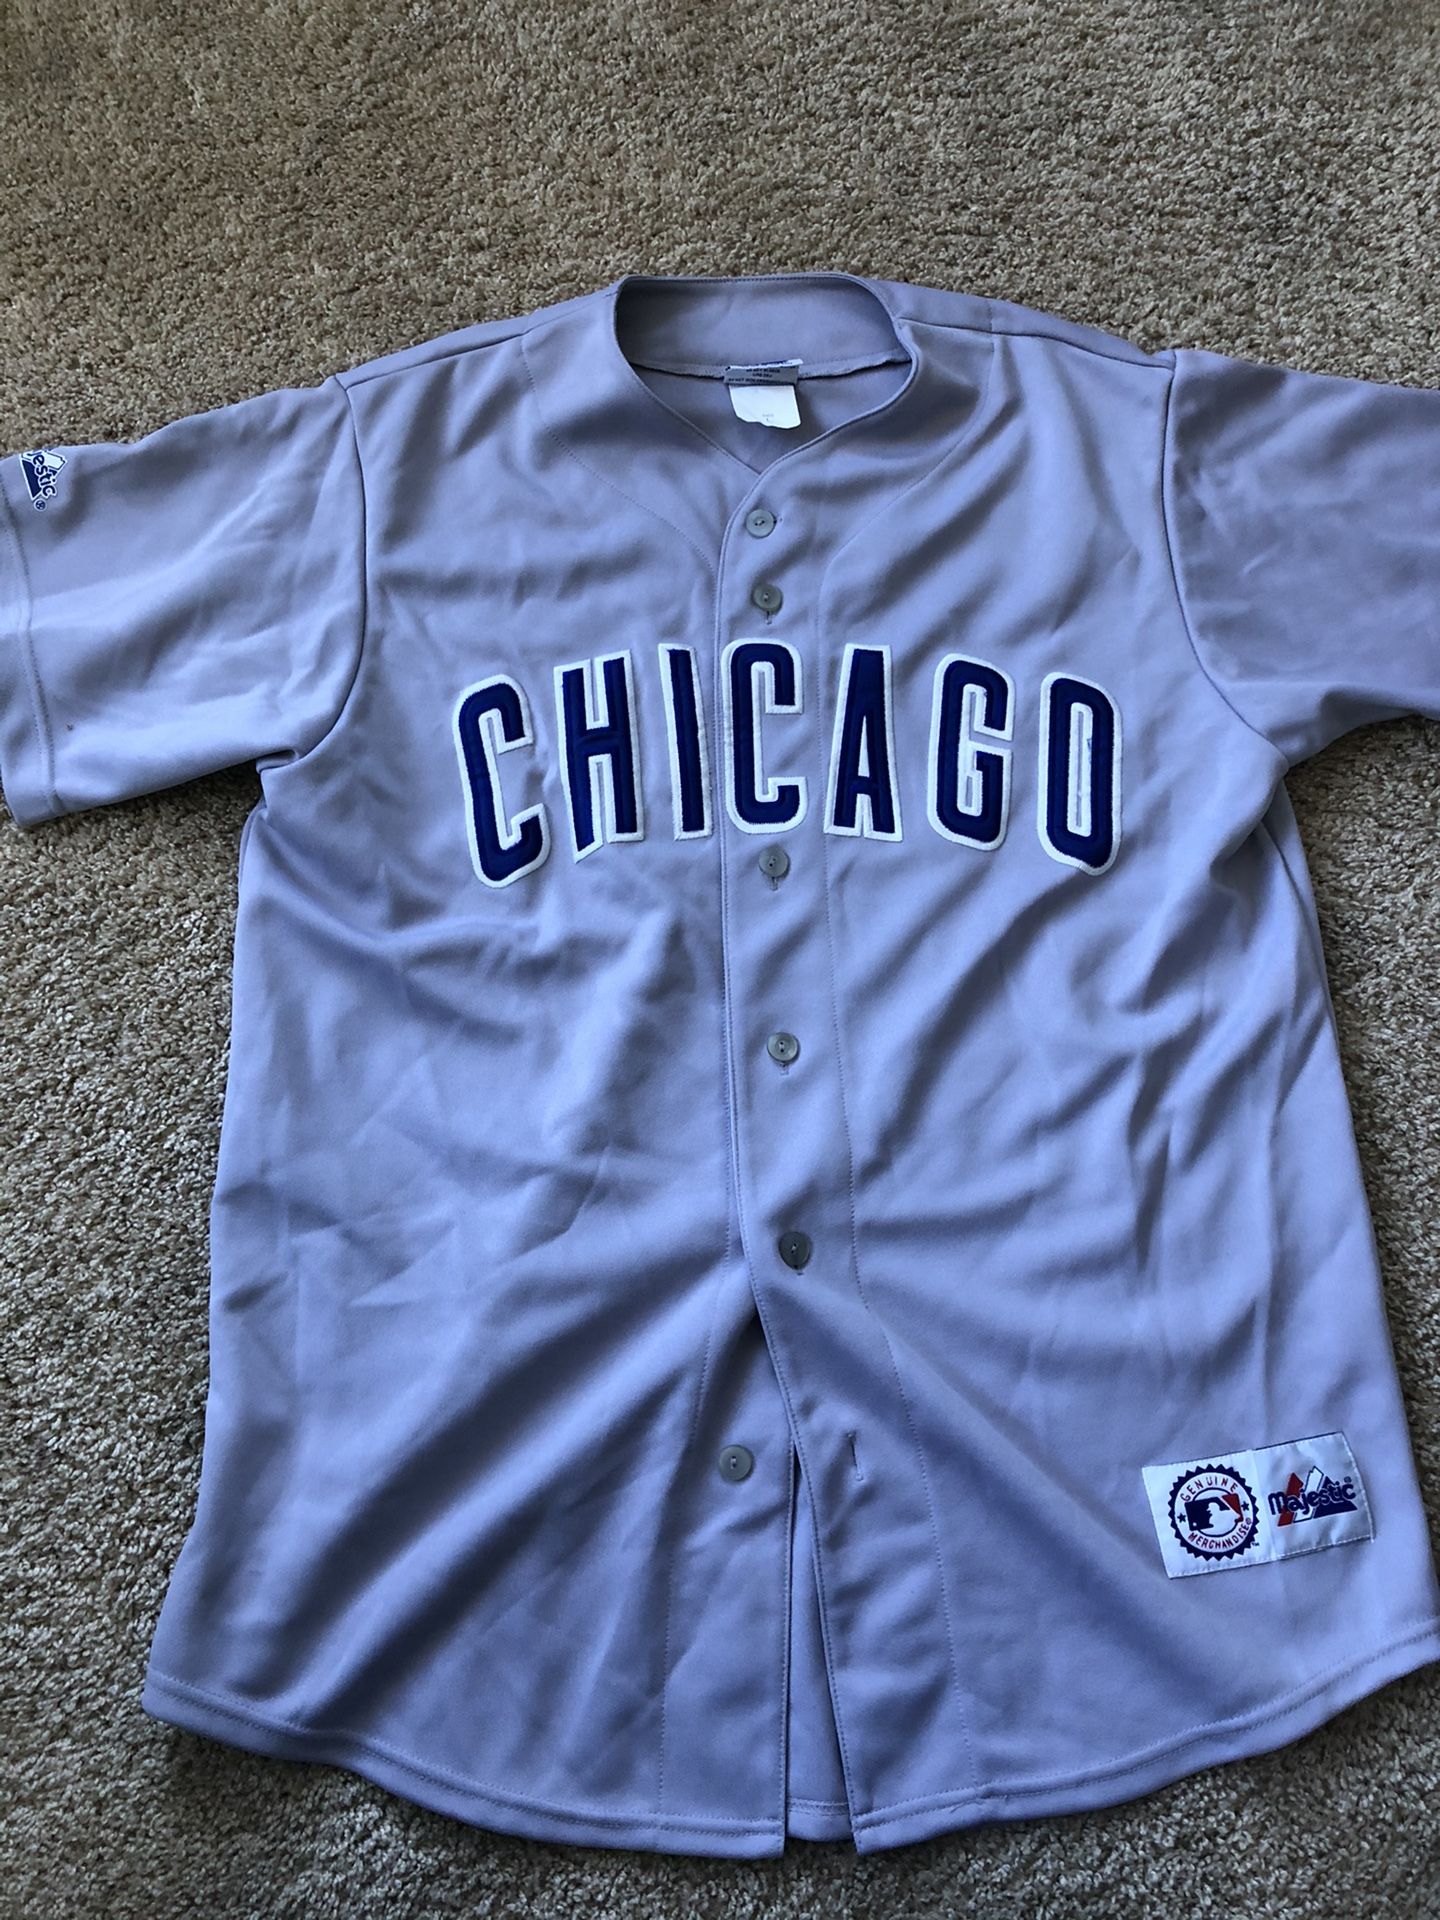 Chicago cubs jersey size large